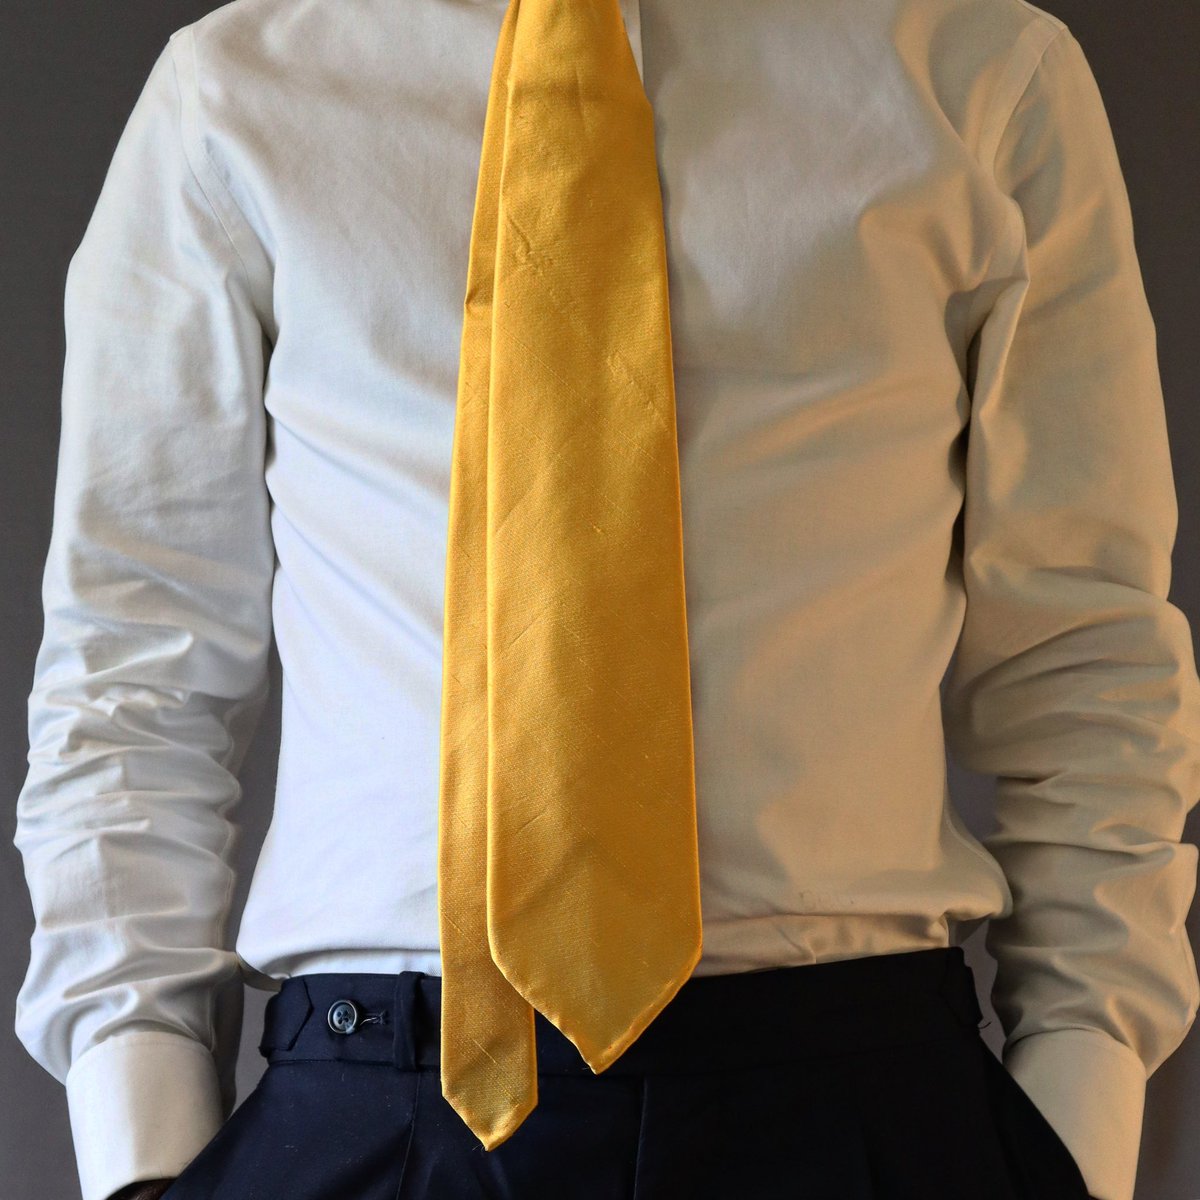 CEO’S LEGACY ACCESSORIES.       The golden wrap! Our handmade ties are very unique pieces. This golden necktie is handmade in England with finest silk and wool interlining. Create your perfect knot  #🪢 #ceoslegacy #accessories #tie #necktie #mensaccessories #accessorize #silk